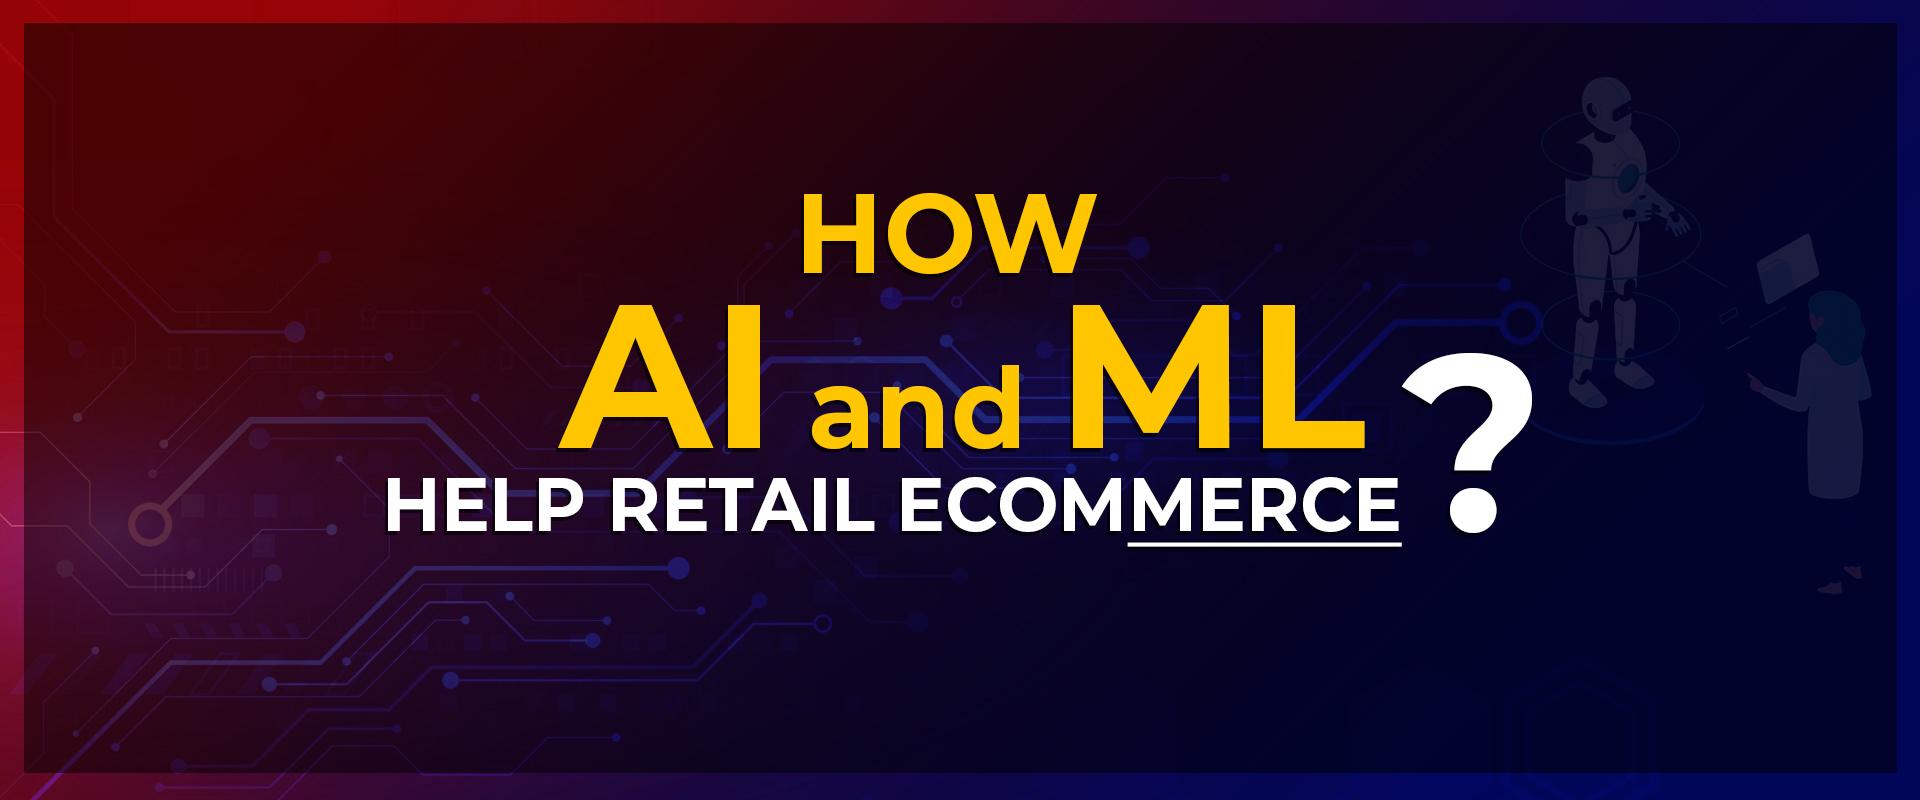 How AI and ML help retail e-commerce?  | Reyecomops